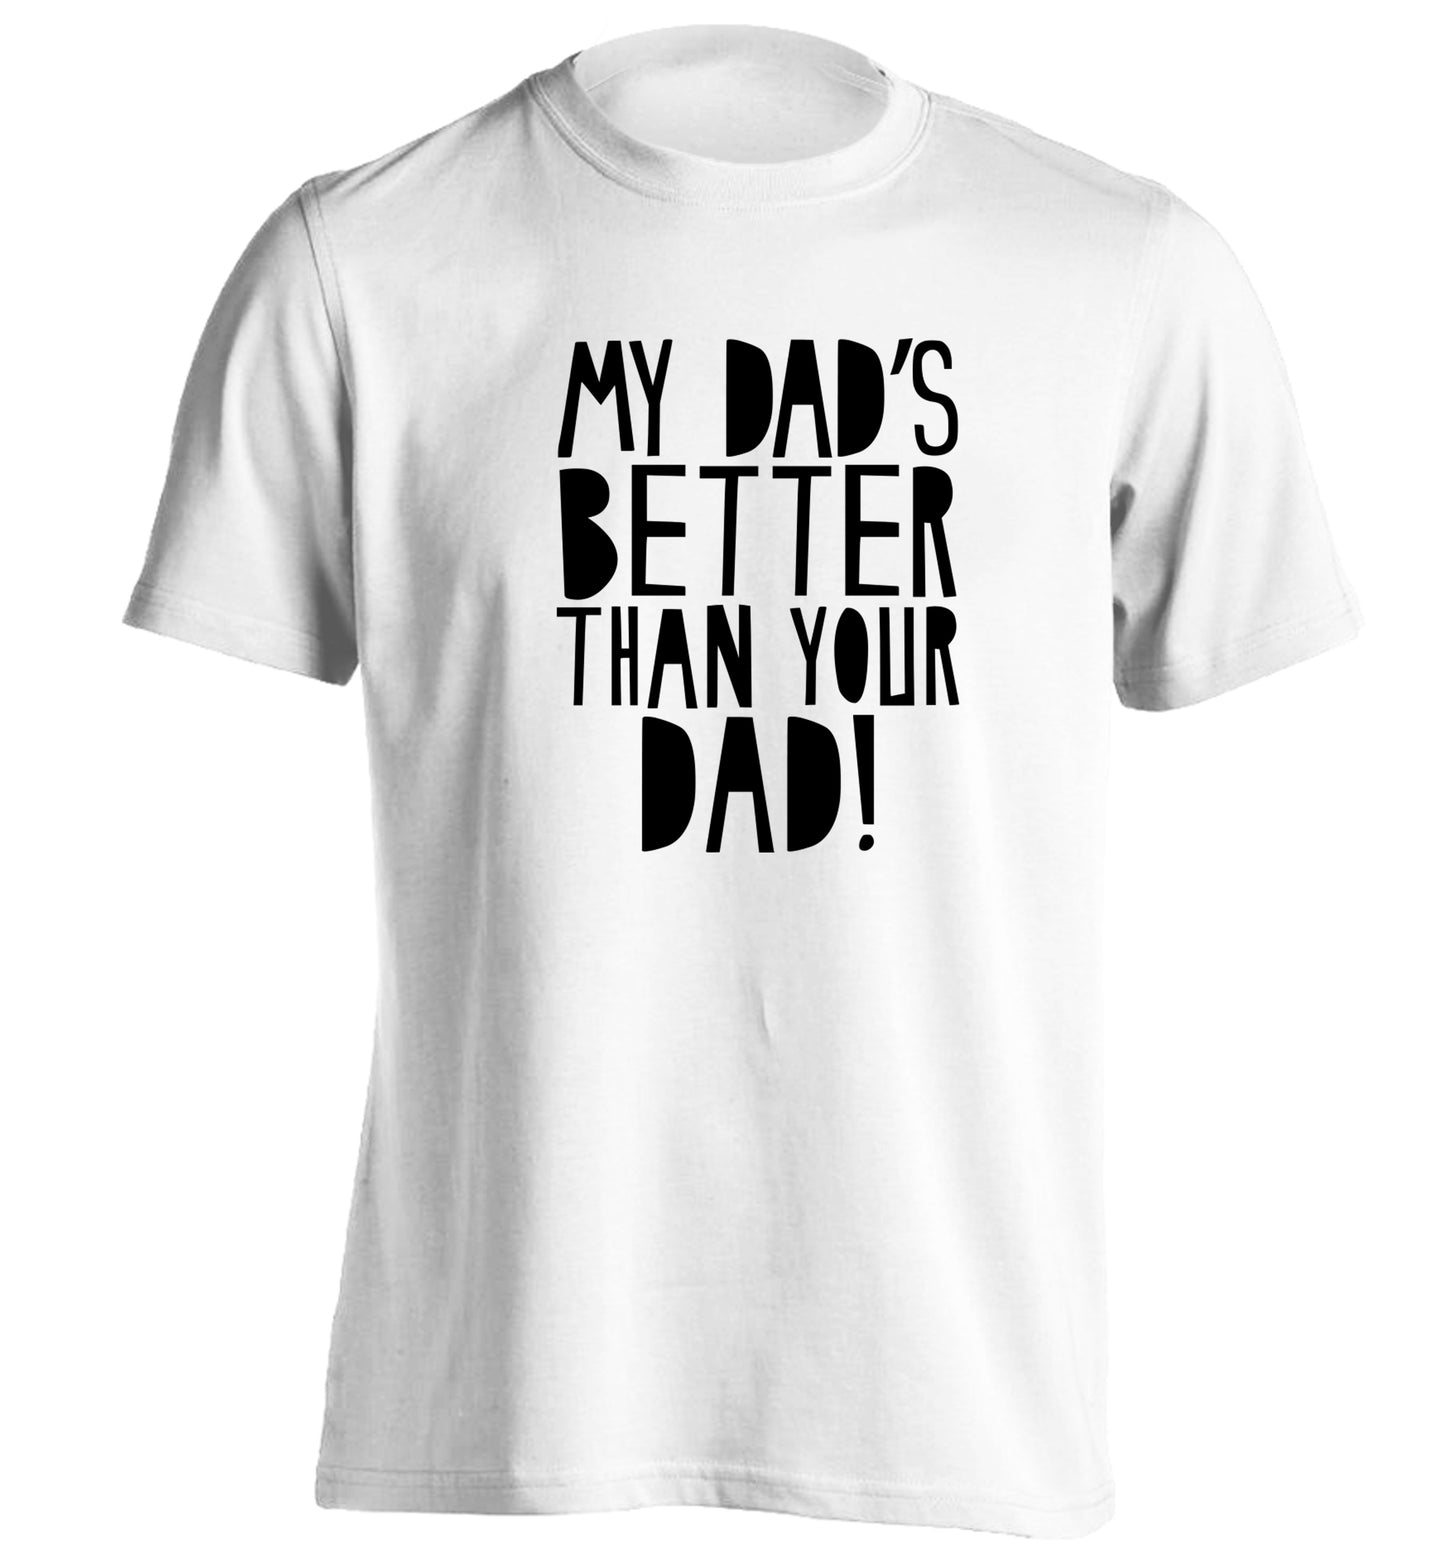 My dad's better than your dad adults unisex white Tshirt 2XL